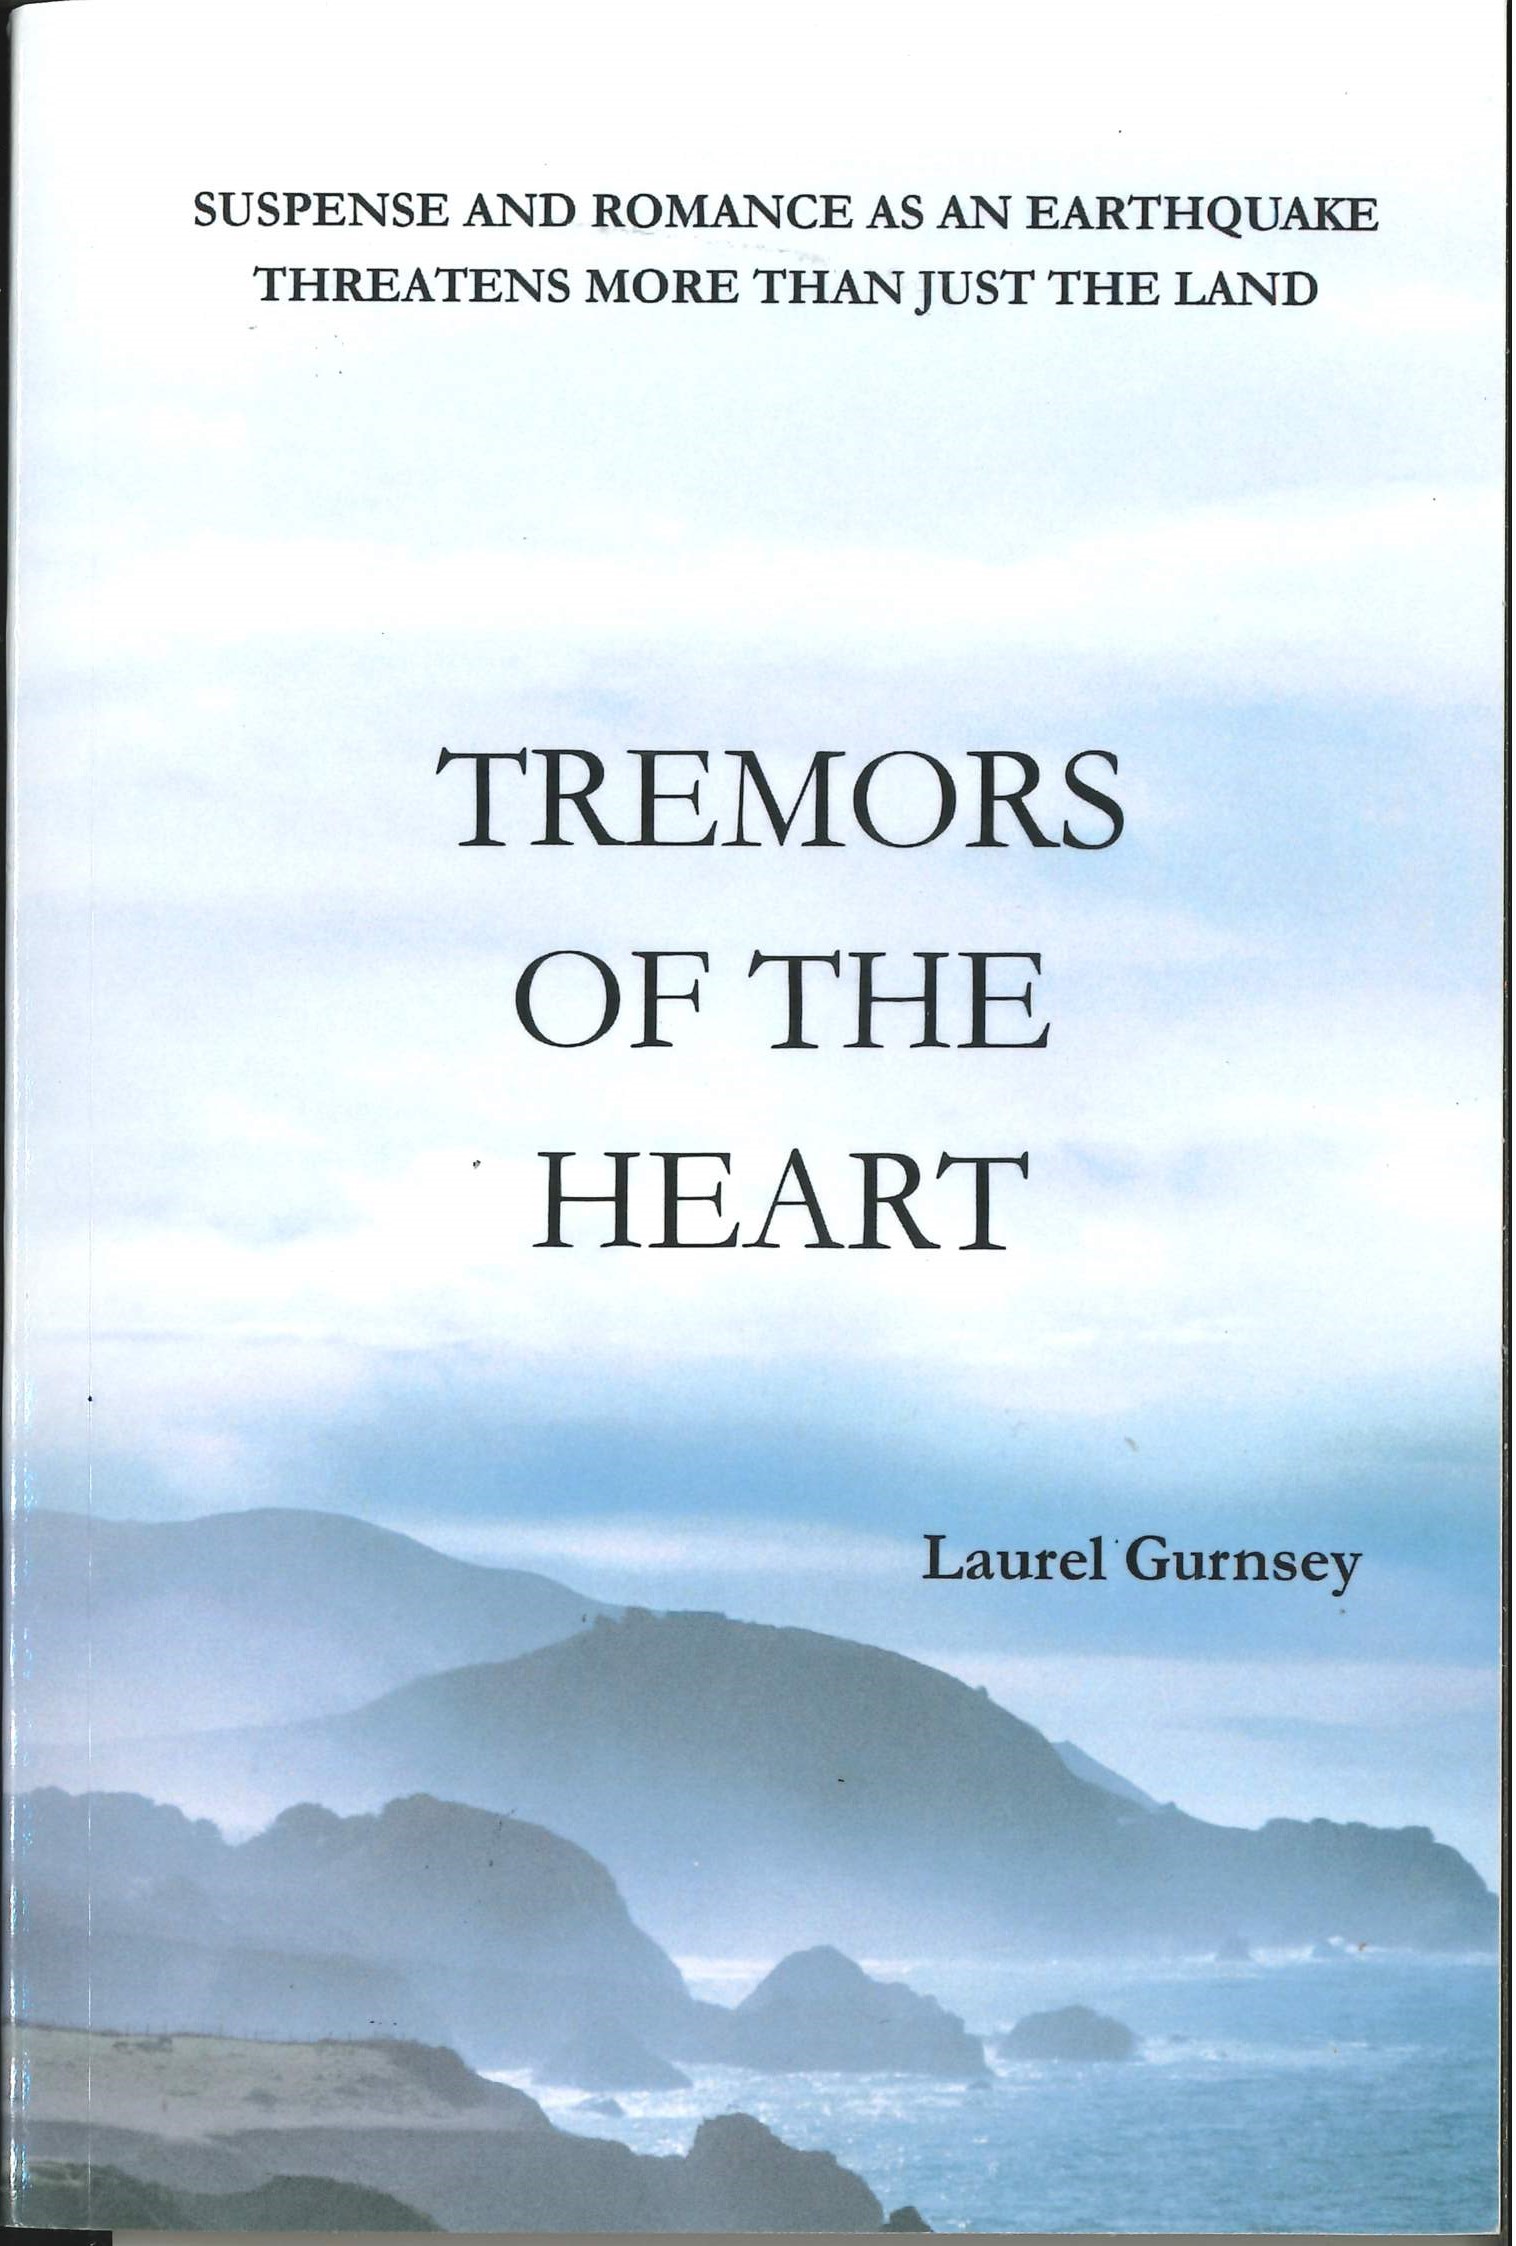 Tremors of the Heart